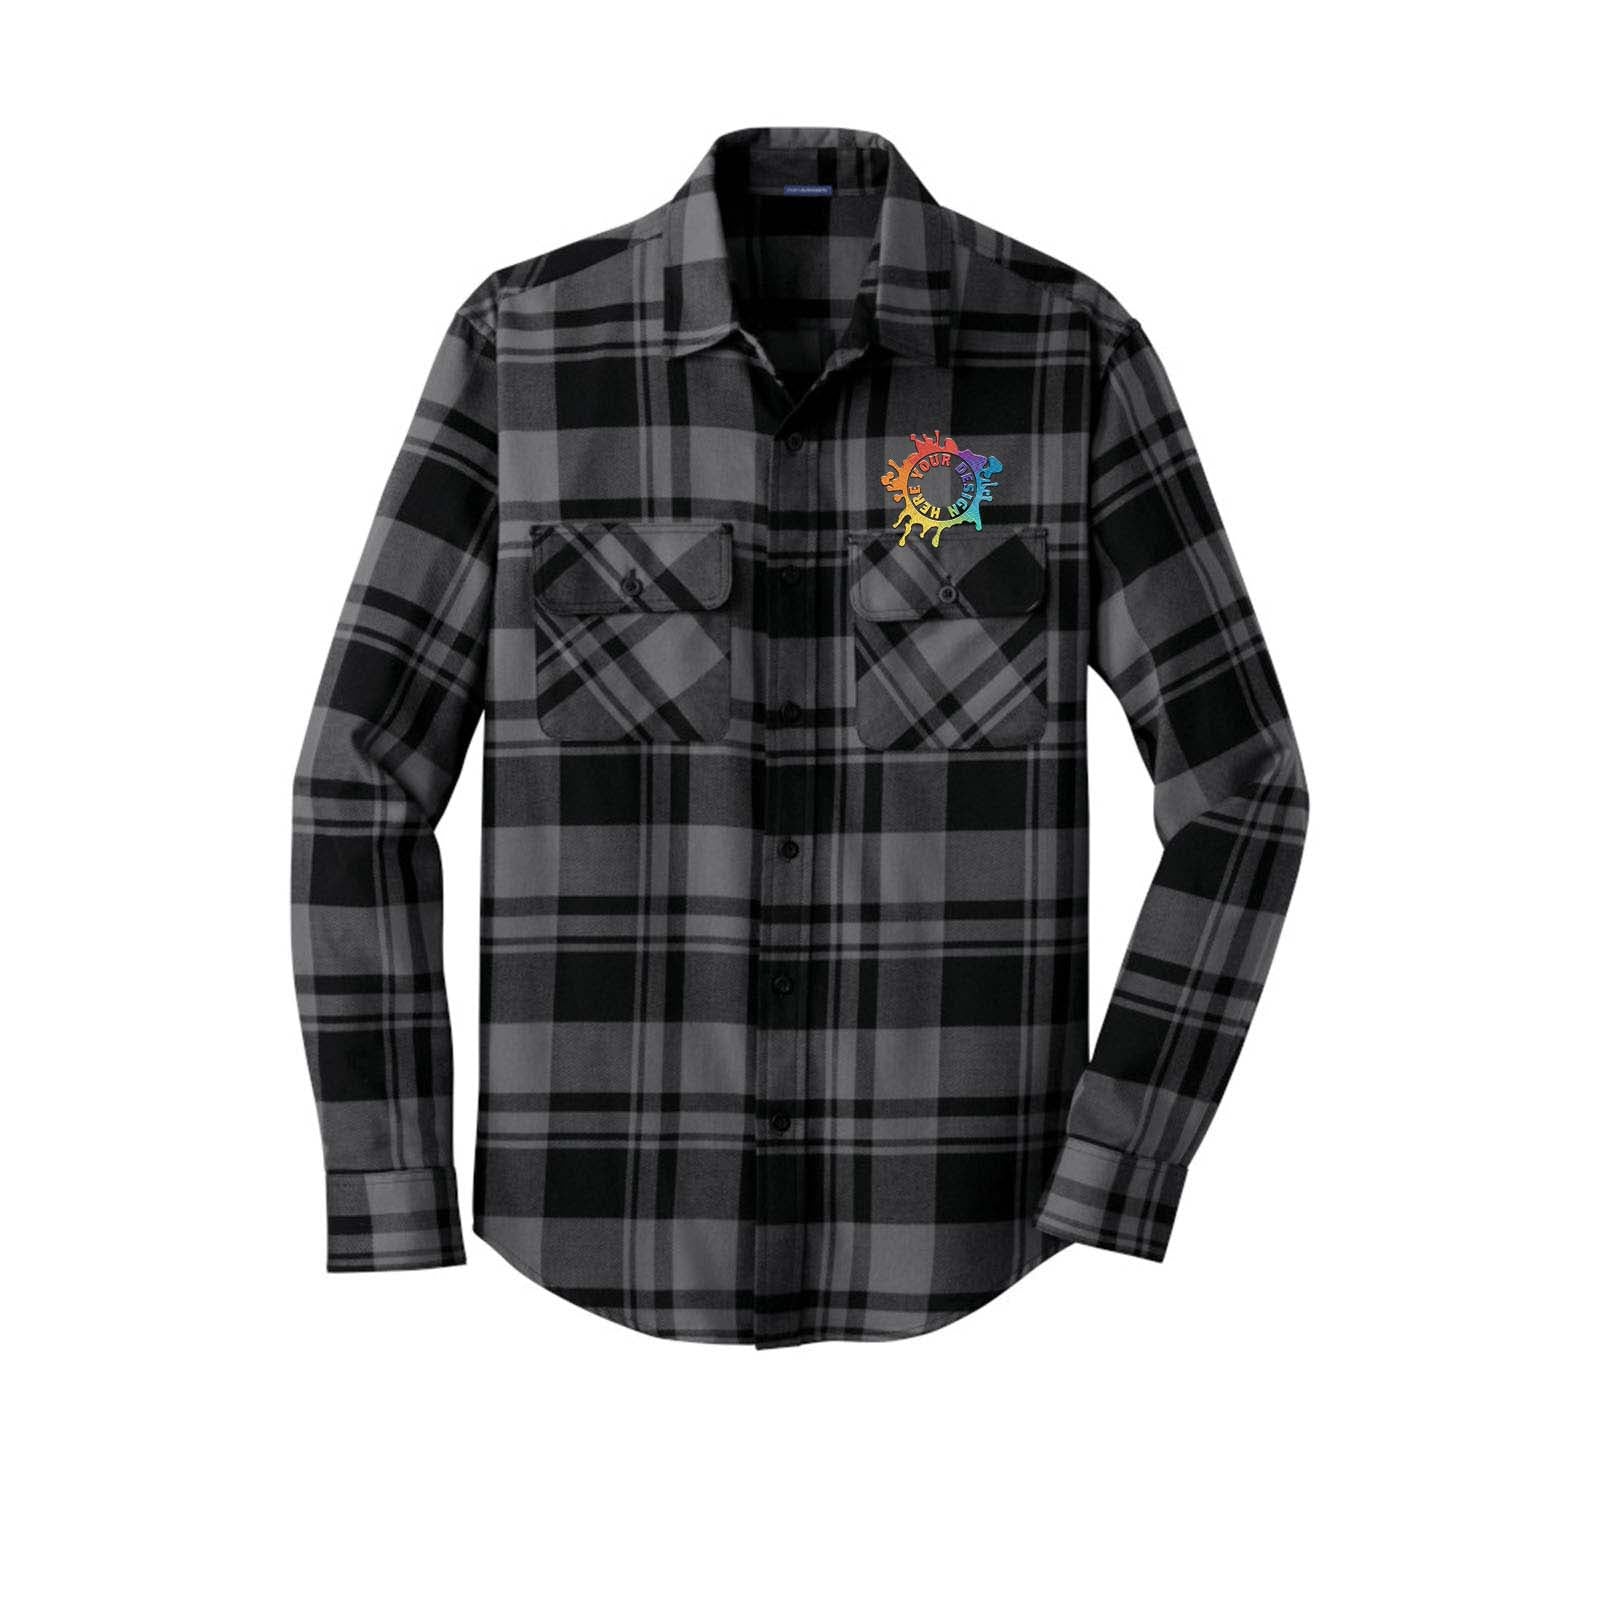 Port Authority® Plaid Flannel Shirt Embroidery - Mato & Hash